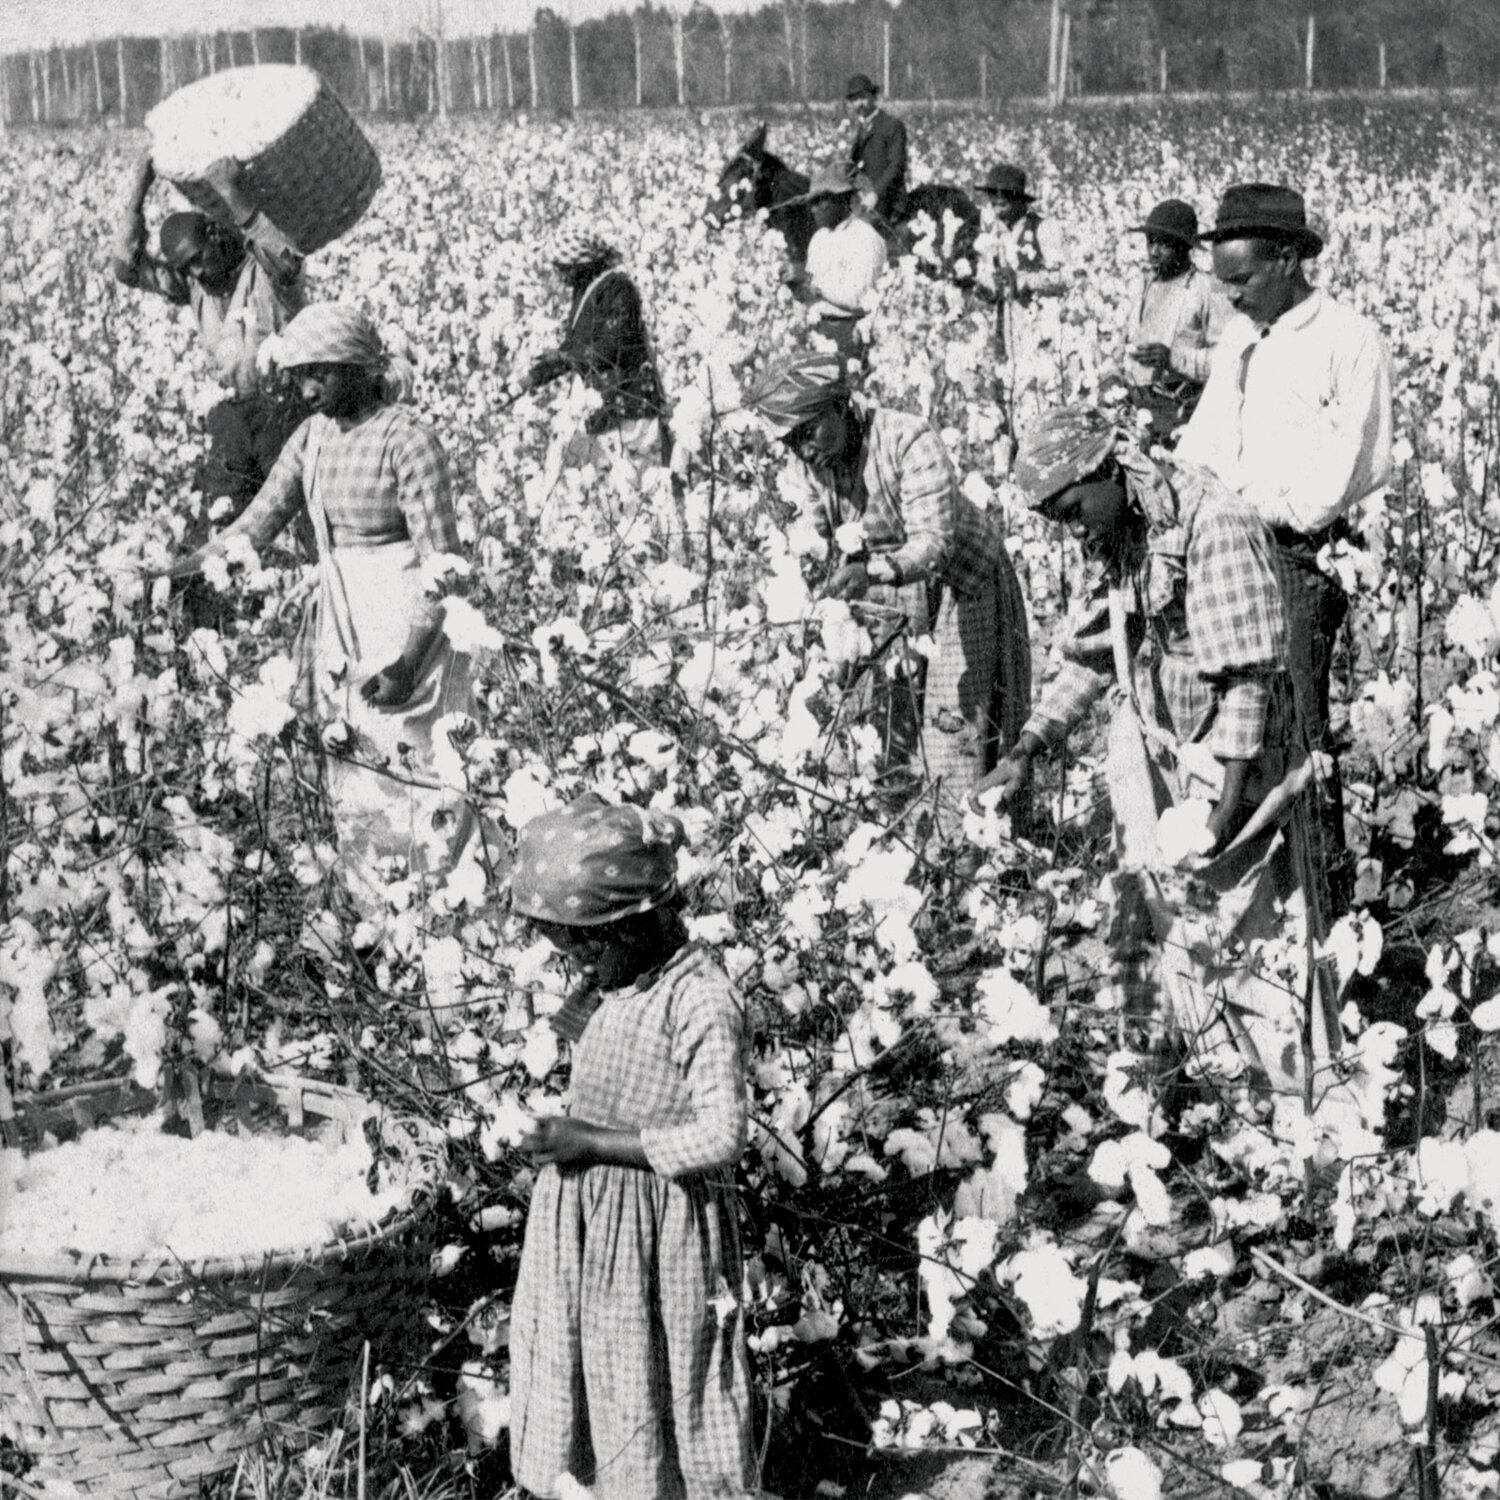 The History of Our Food System is Rooted in Racism